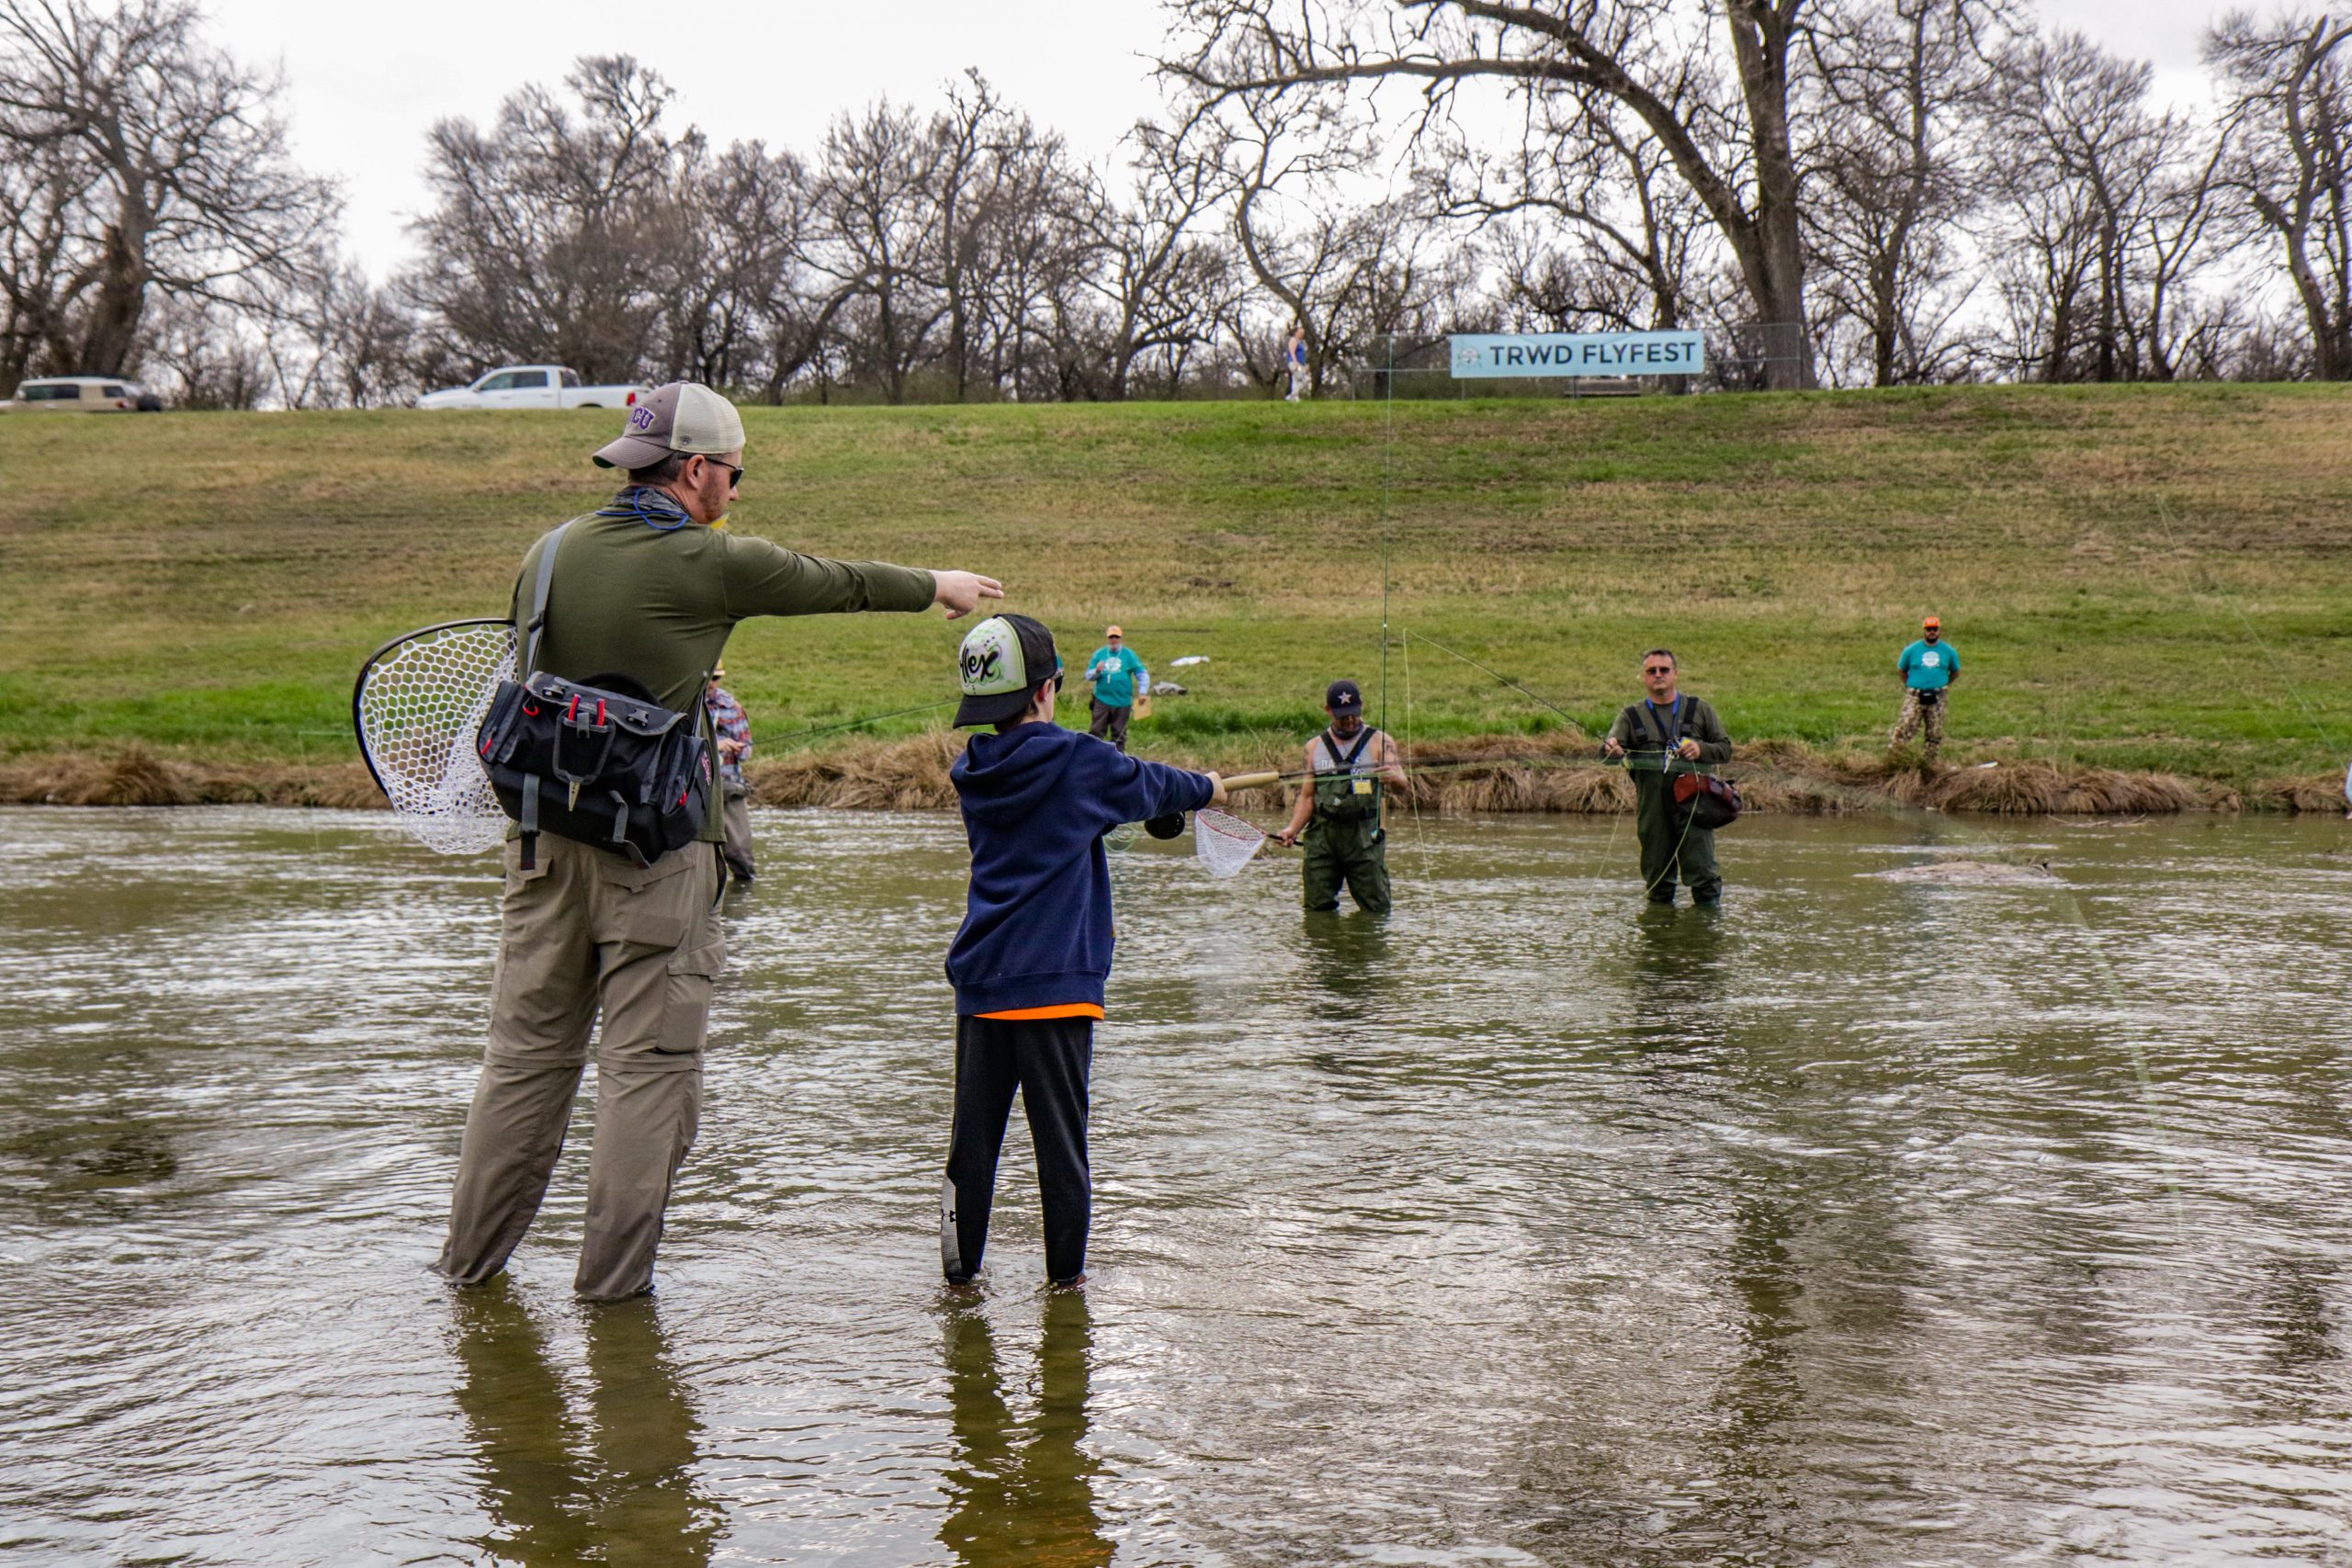 TRWD Flyfest Returns to the Trinity River in Fort Worth on March 12